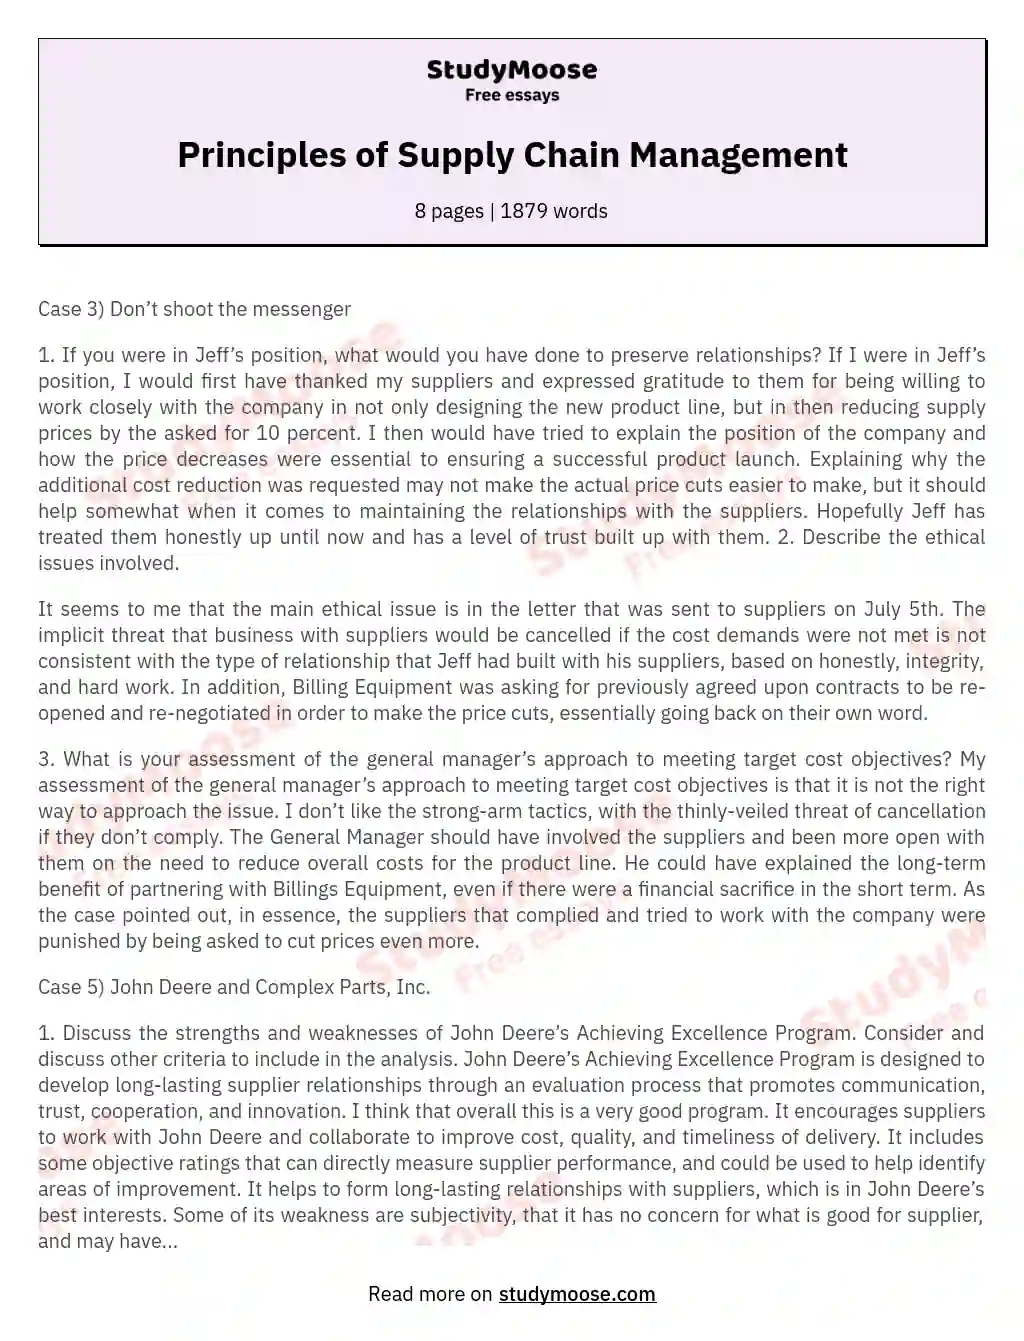 Principles of Supply Chain Management essay